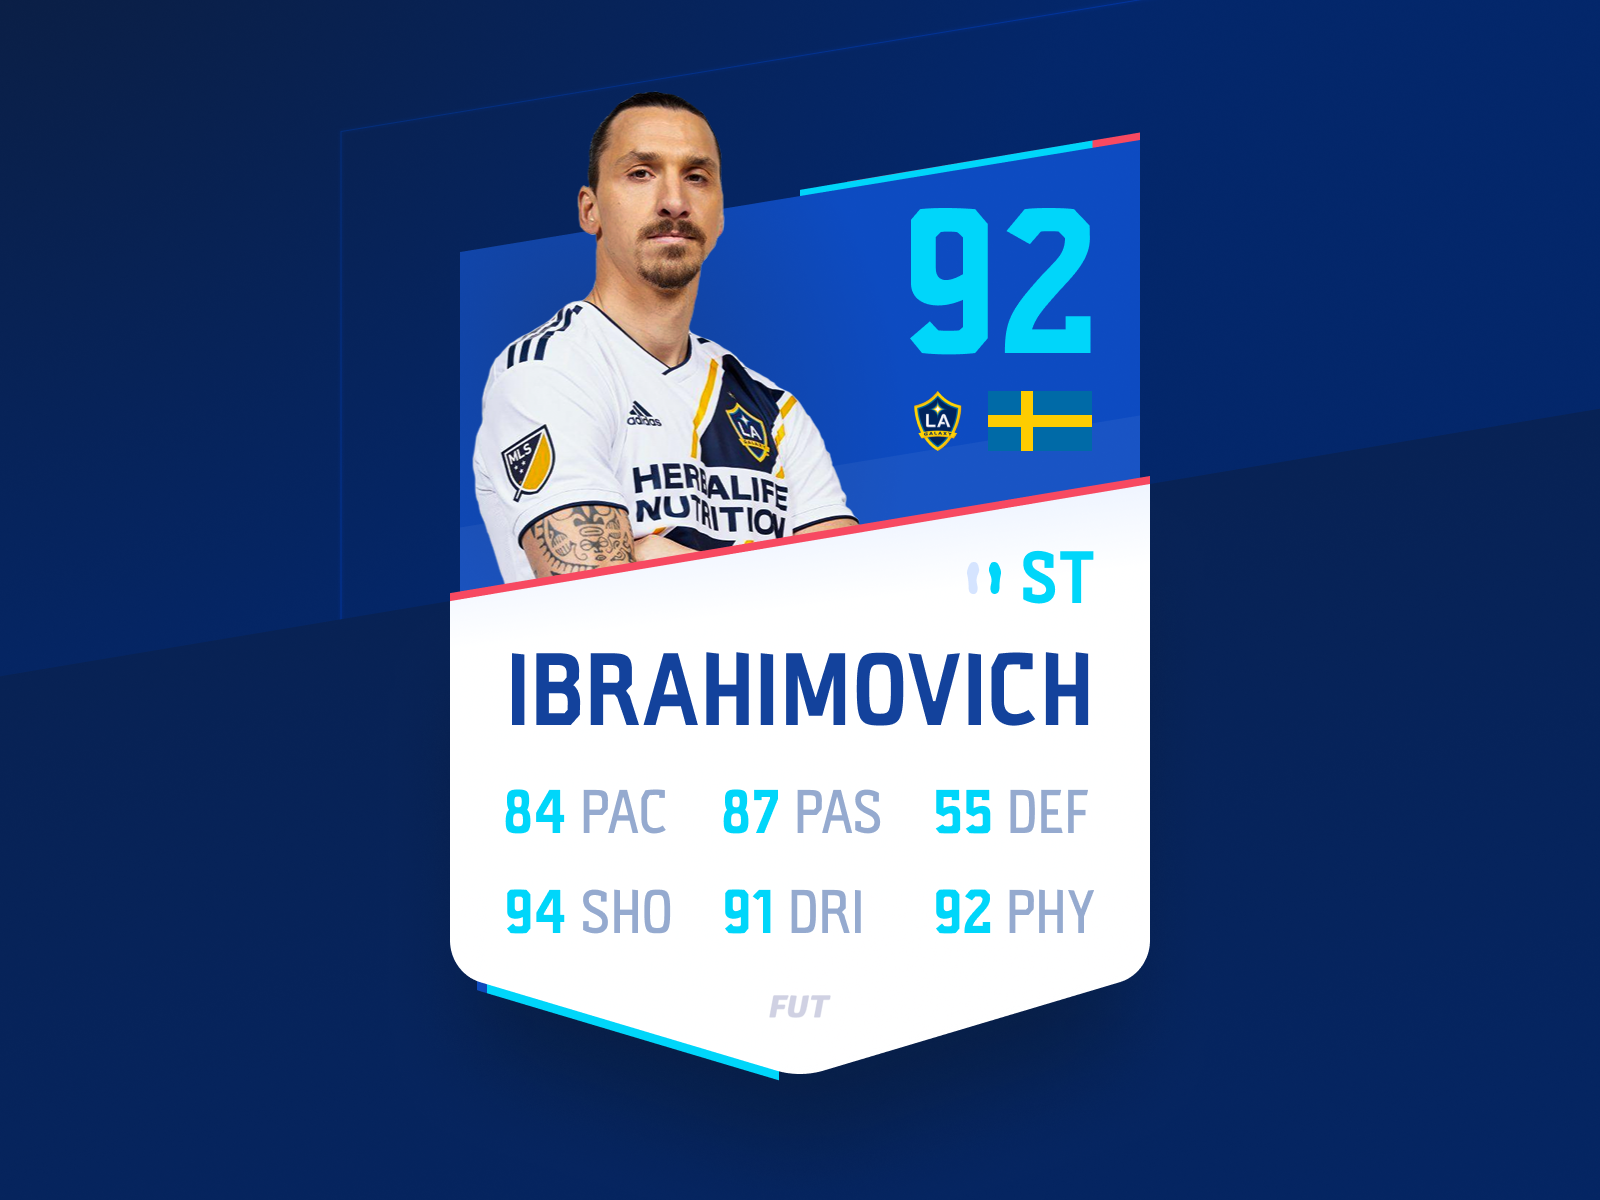 FIFA Player Card by Roman on Dribbble